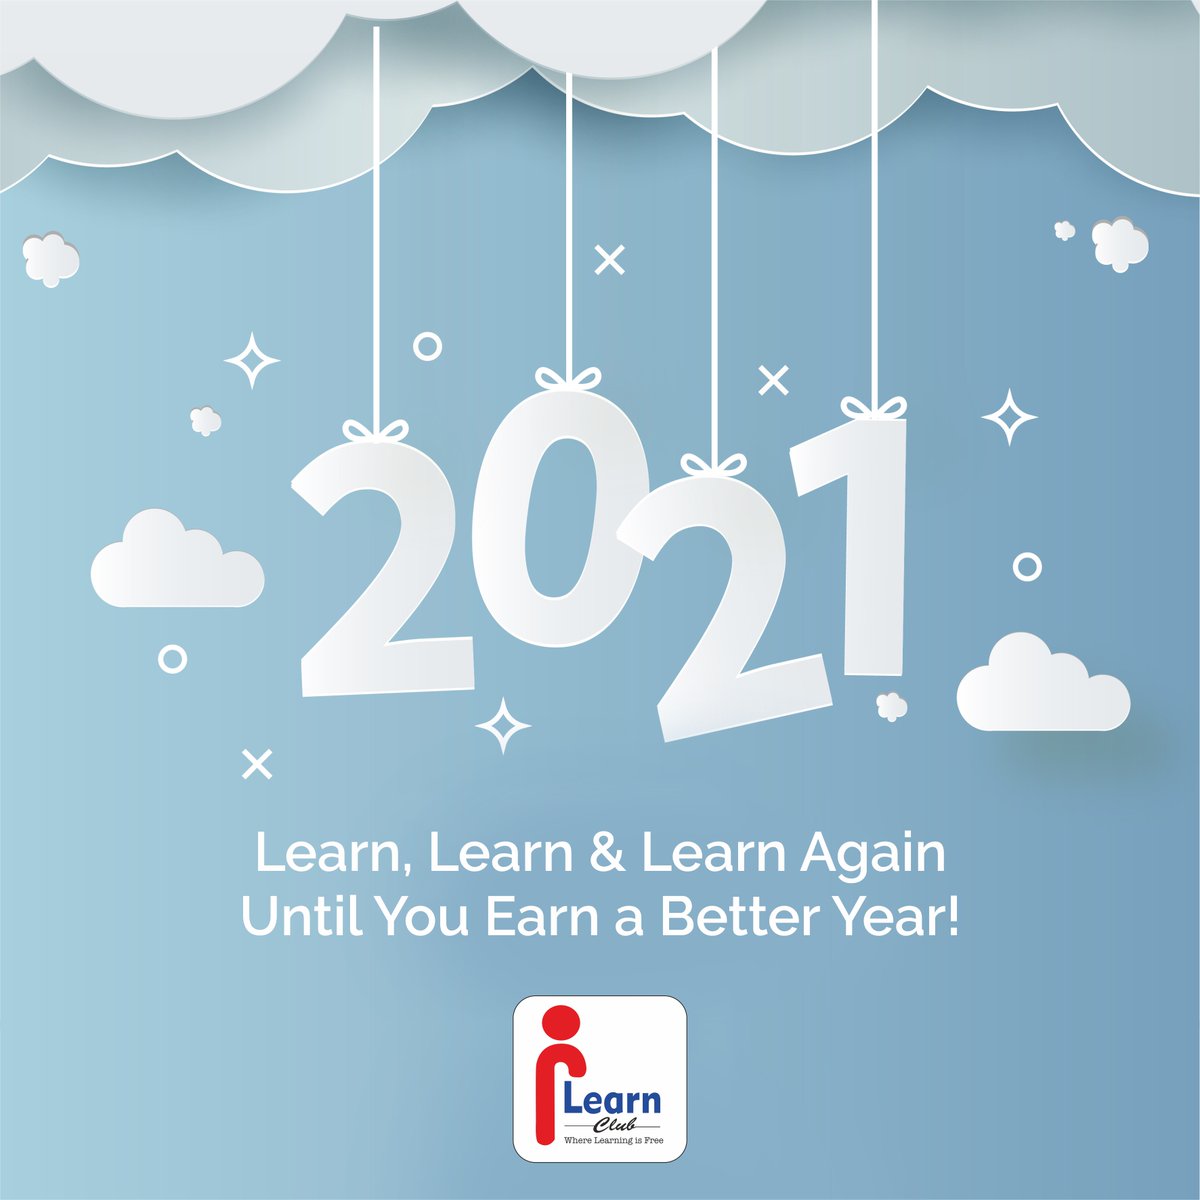 Keep learning and have a better year ahead! Happy new year! #NewHope #NewBeginning #NewYear2021 #NewYear #ILearn